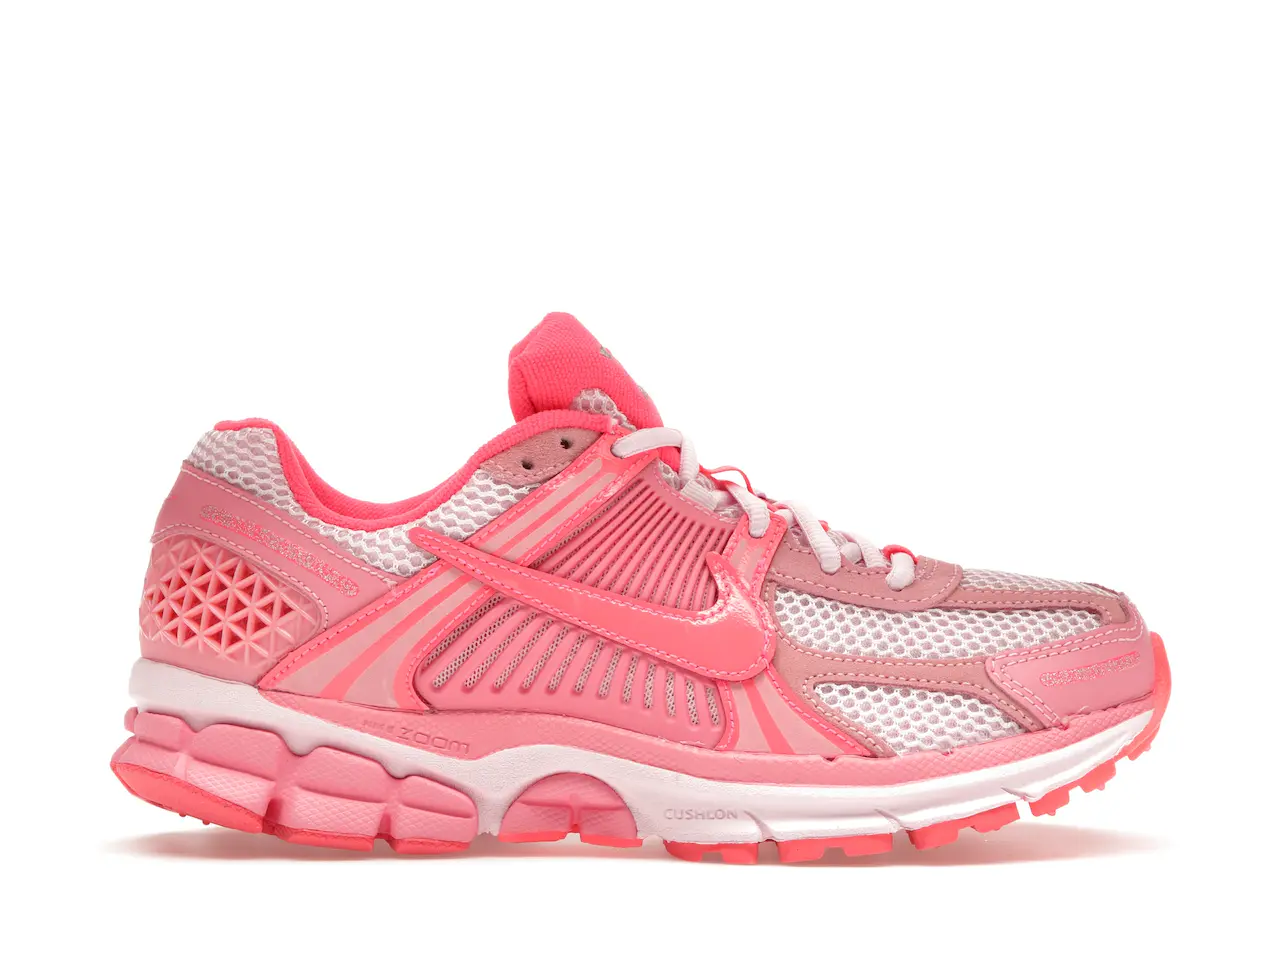 Nike Zoom Vomero 5 Coral Chalk Hot Punch (Women's) - FQ0257-666 - US